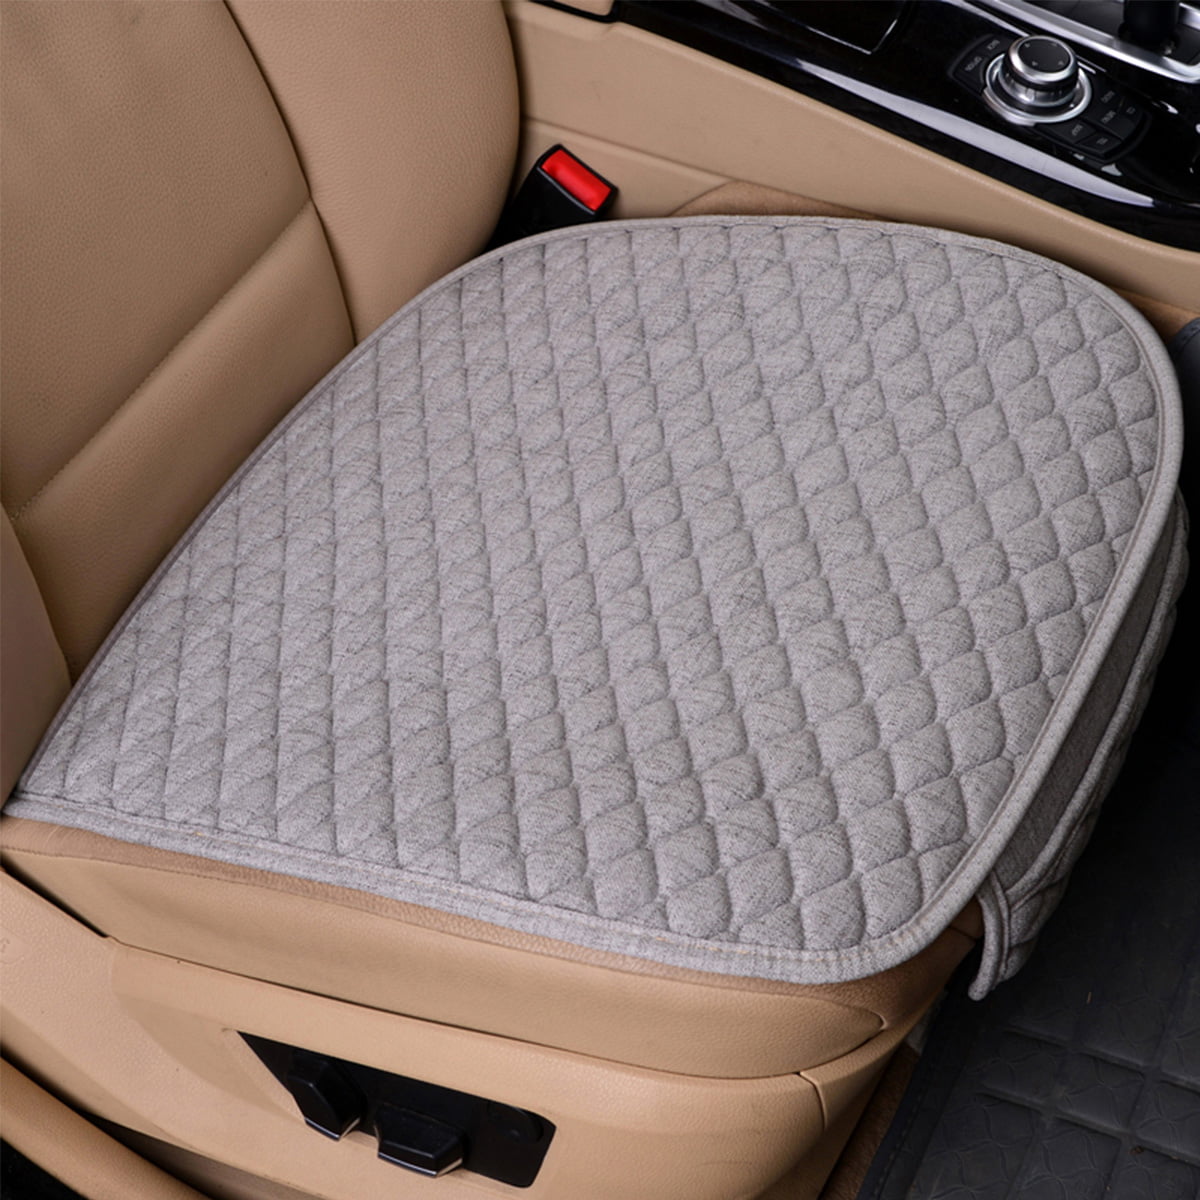 Flax Auto Car Interior Front Seat Cover Home Office Chair Cushion Mat Pad Black